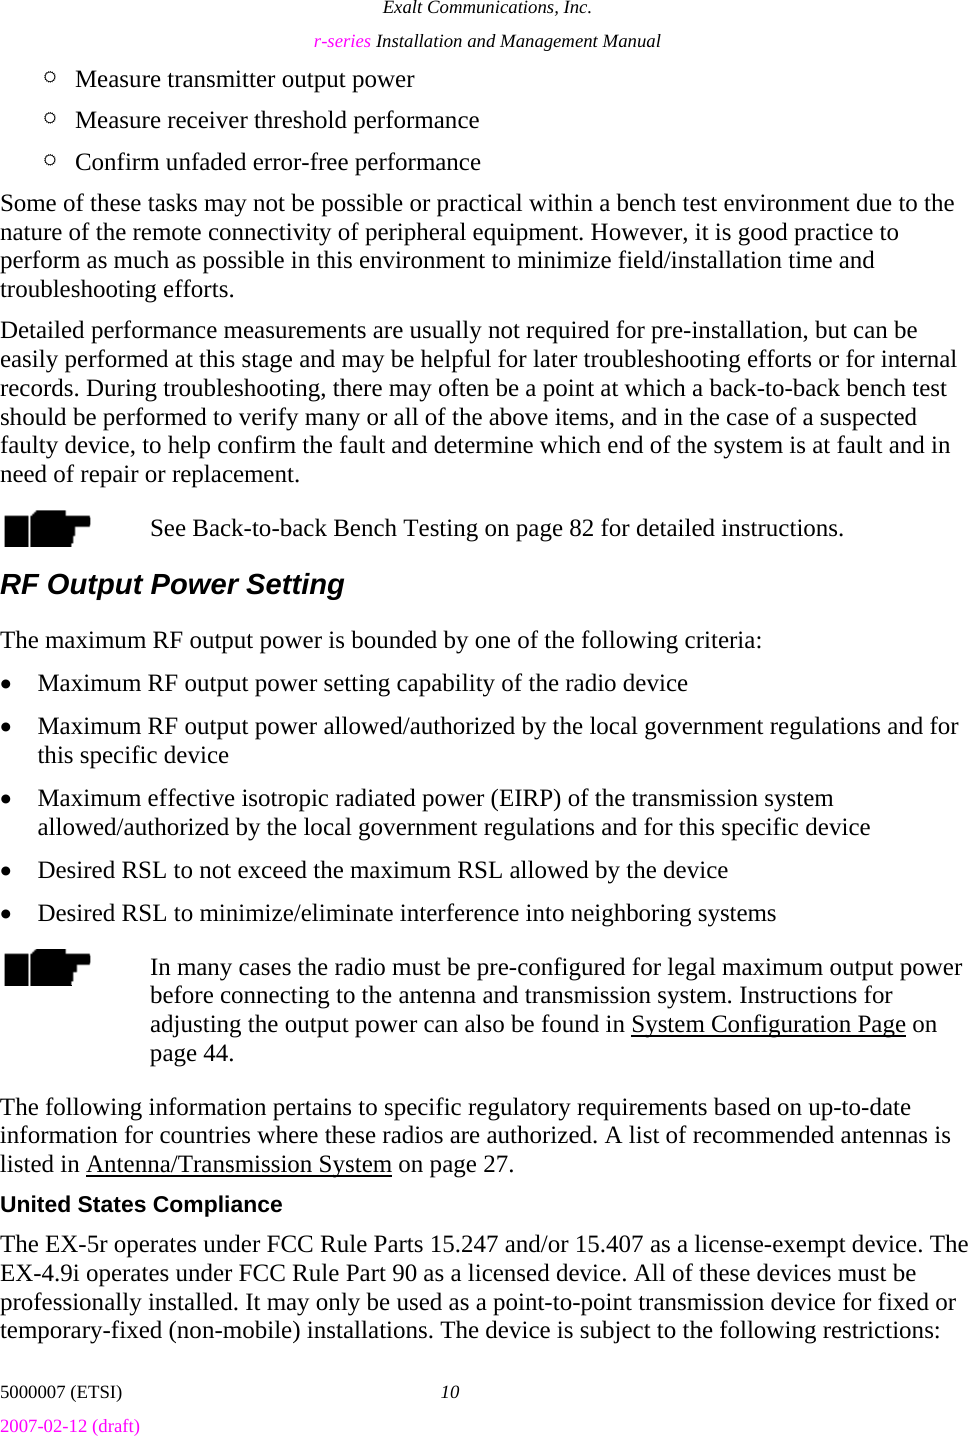 Exalt Communications, Inc. r-series Installation and Management Manual 5000007 (ETSI)  10 2007-02-12 (draft)  ¶ Measure transmitter output power ¶ Measure receiver threshold performance ¶ Confirm unfaded error-free performance Some of these tasks may not be possible or practical within a bench test environment due to the nature of the remote connectivity of peripheral equipment. However, it is good practice to perform as much as possible in this environment to minimize field/installation time and troubleshooting efforts. Detailed performance measurements are usually not required for pre-installation, but can be easily performed at this stage and may be helpful for later troubleshooting efforts or for internal records. During troubleshooting, there may often be a point at which a back-to-back bench test should be performed to verify many or all of the above items, and in the case of a suspected faulty device, to help confirm the fault and determine which end of the system is at fault and in need of repair or replacement. See Back-to-back Bench Testing on page 82 for detailed instructions. RF Output Power Setting The maximum RF output power is bounded by one of the following criteria: • Maximum RF output power setting capability of the radio device • Maximum RF output power allowed/authorized by the local government regulations and for this specific device • Maximum effective isotropic radiated power (EIRP) of the transmission system allowed/authorized by the local government regulations and for this specific device • Desired RSL to not exceed the maximum RSL allowed by the device • Desired RSL to minimize/eliminate interference into neighboring systems In many cases the radio must be pre-configured for legal maximum output power before connecting to the antenna and transmission system. Instructions for adjusting the output power can also be found in System Configuration Page on page 44. The following information pertains to specific regulatory requirements based on up-to-date information for countries where these radios are authorized. A list of recommended antennas is listed in Antenna/Transmission System on page 27. United States Compliance The EX-5r operates under FCC Rule Parts 15.247 and/or 15.407 as a license-exempt device. The EX-4.9i operates under FCC Rule Part 90 as a licensed device. All of these devices must be professionally installed. It may only be used as a point-to-point transmission device for fixed or temporary-fixed (non-mobile) installations. The device is subject to the following restrictions: 